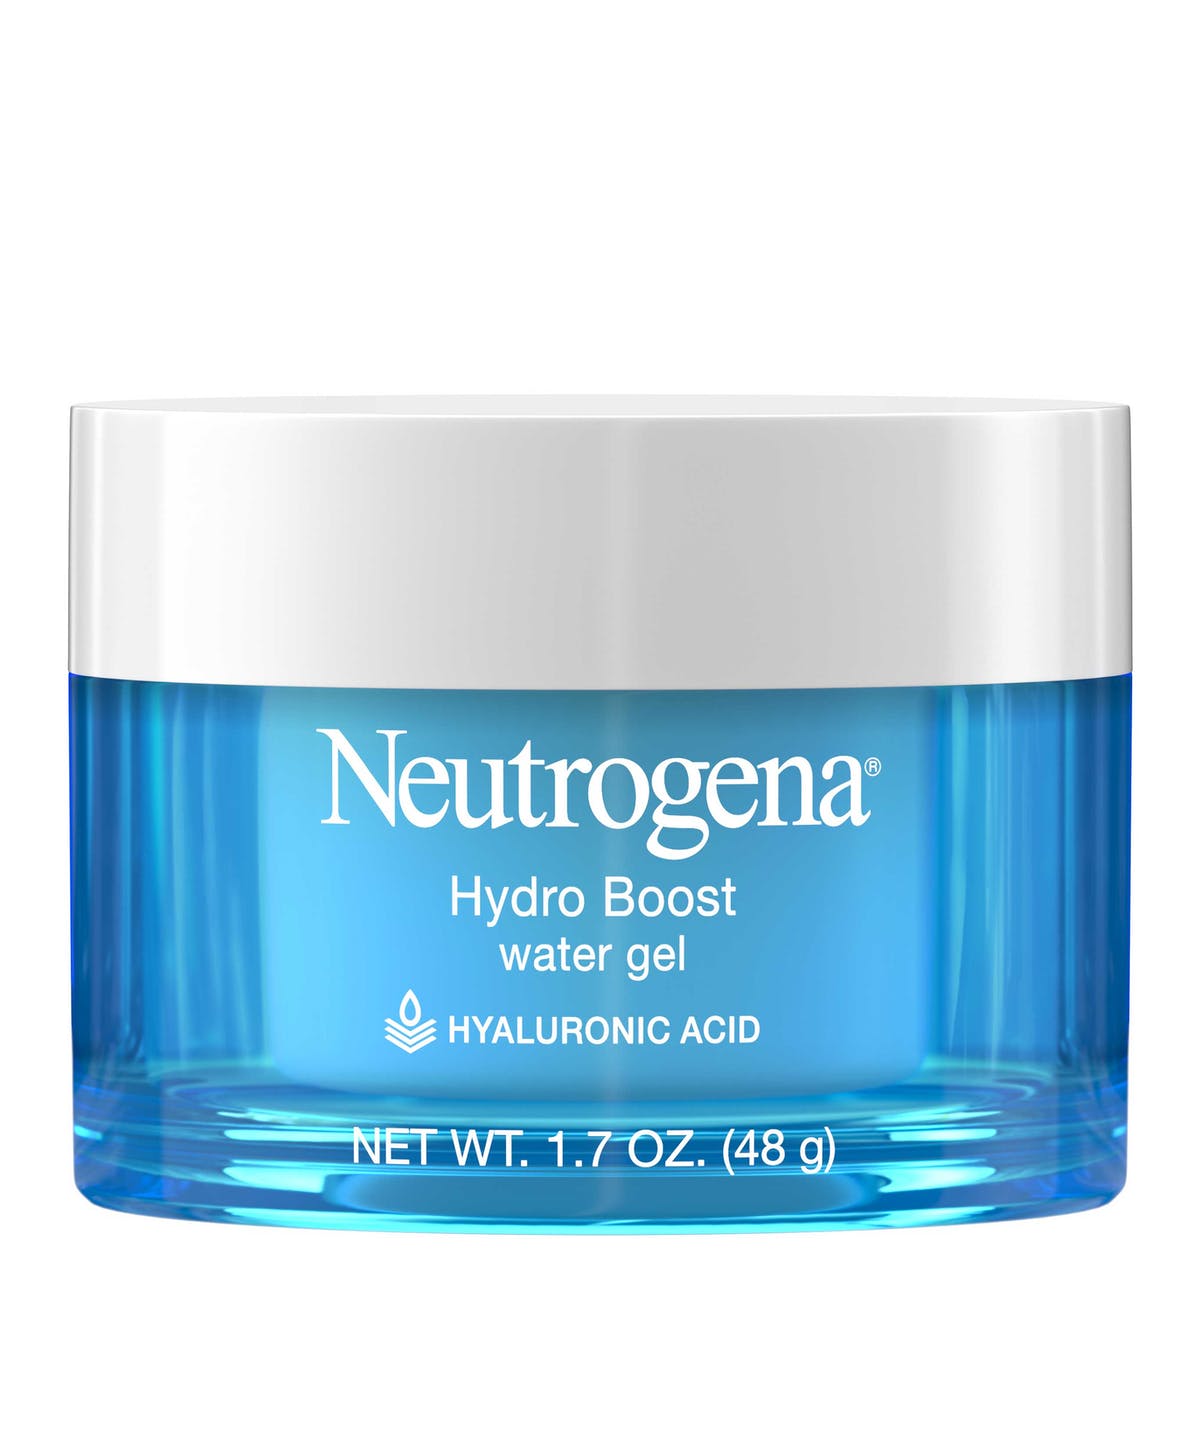 Neutrogena Hydro Boost Water Gel with Hyaluronic Acid for Dry Skin